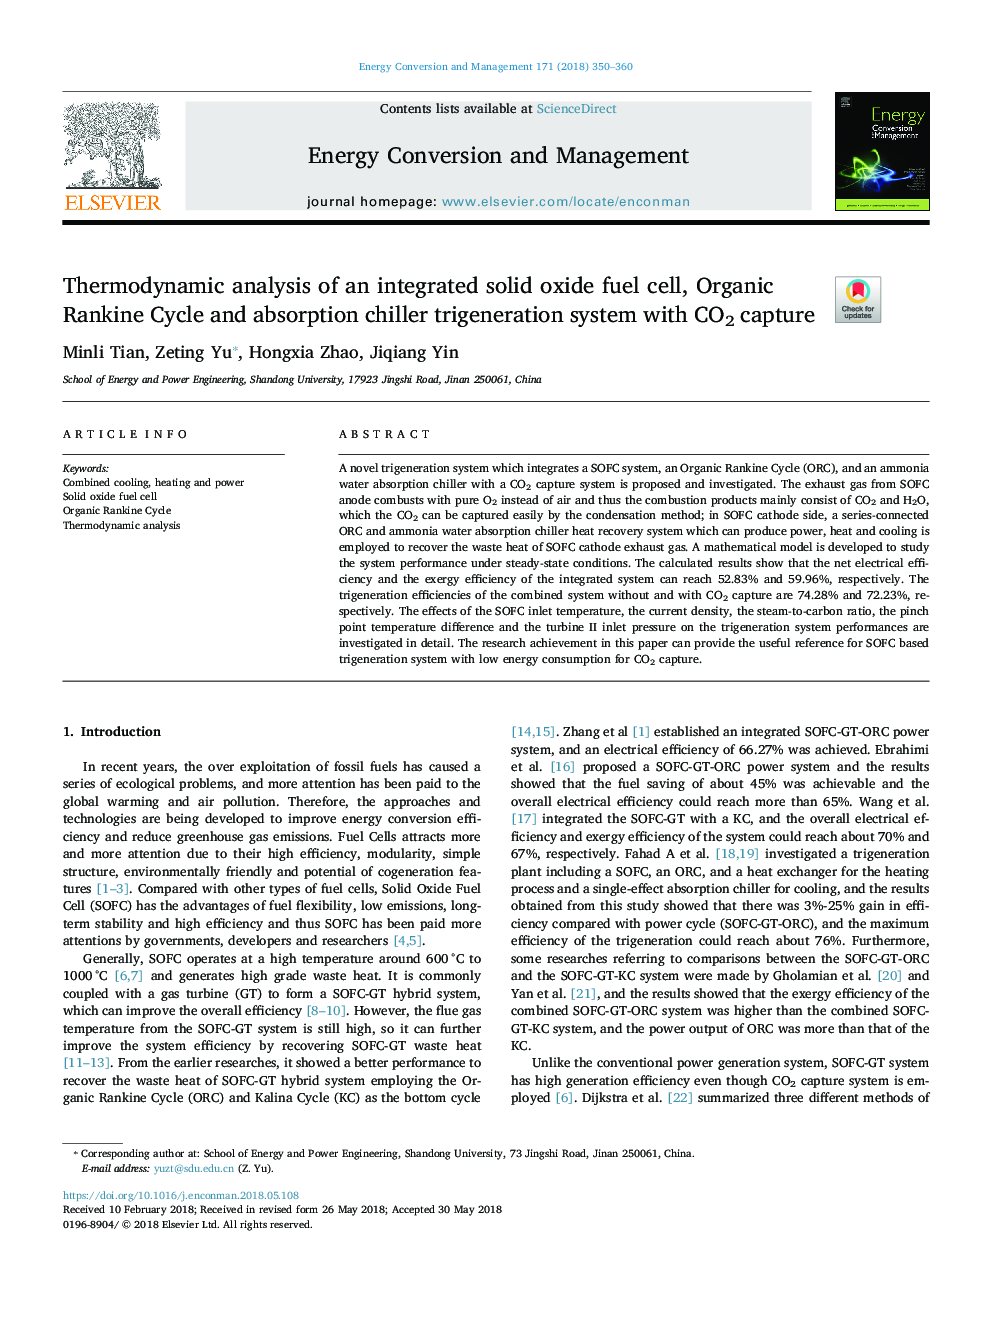 Thermodynamic analysis of an integrated solid oxide fuel cell, Organic Rankine Cycle and absorption chiller trigeneration system with CO2 capture